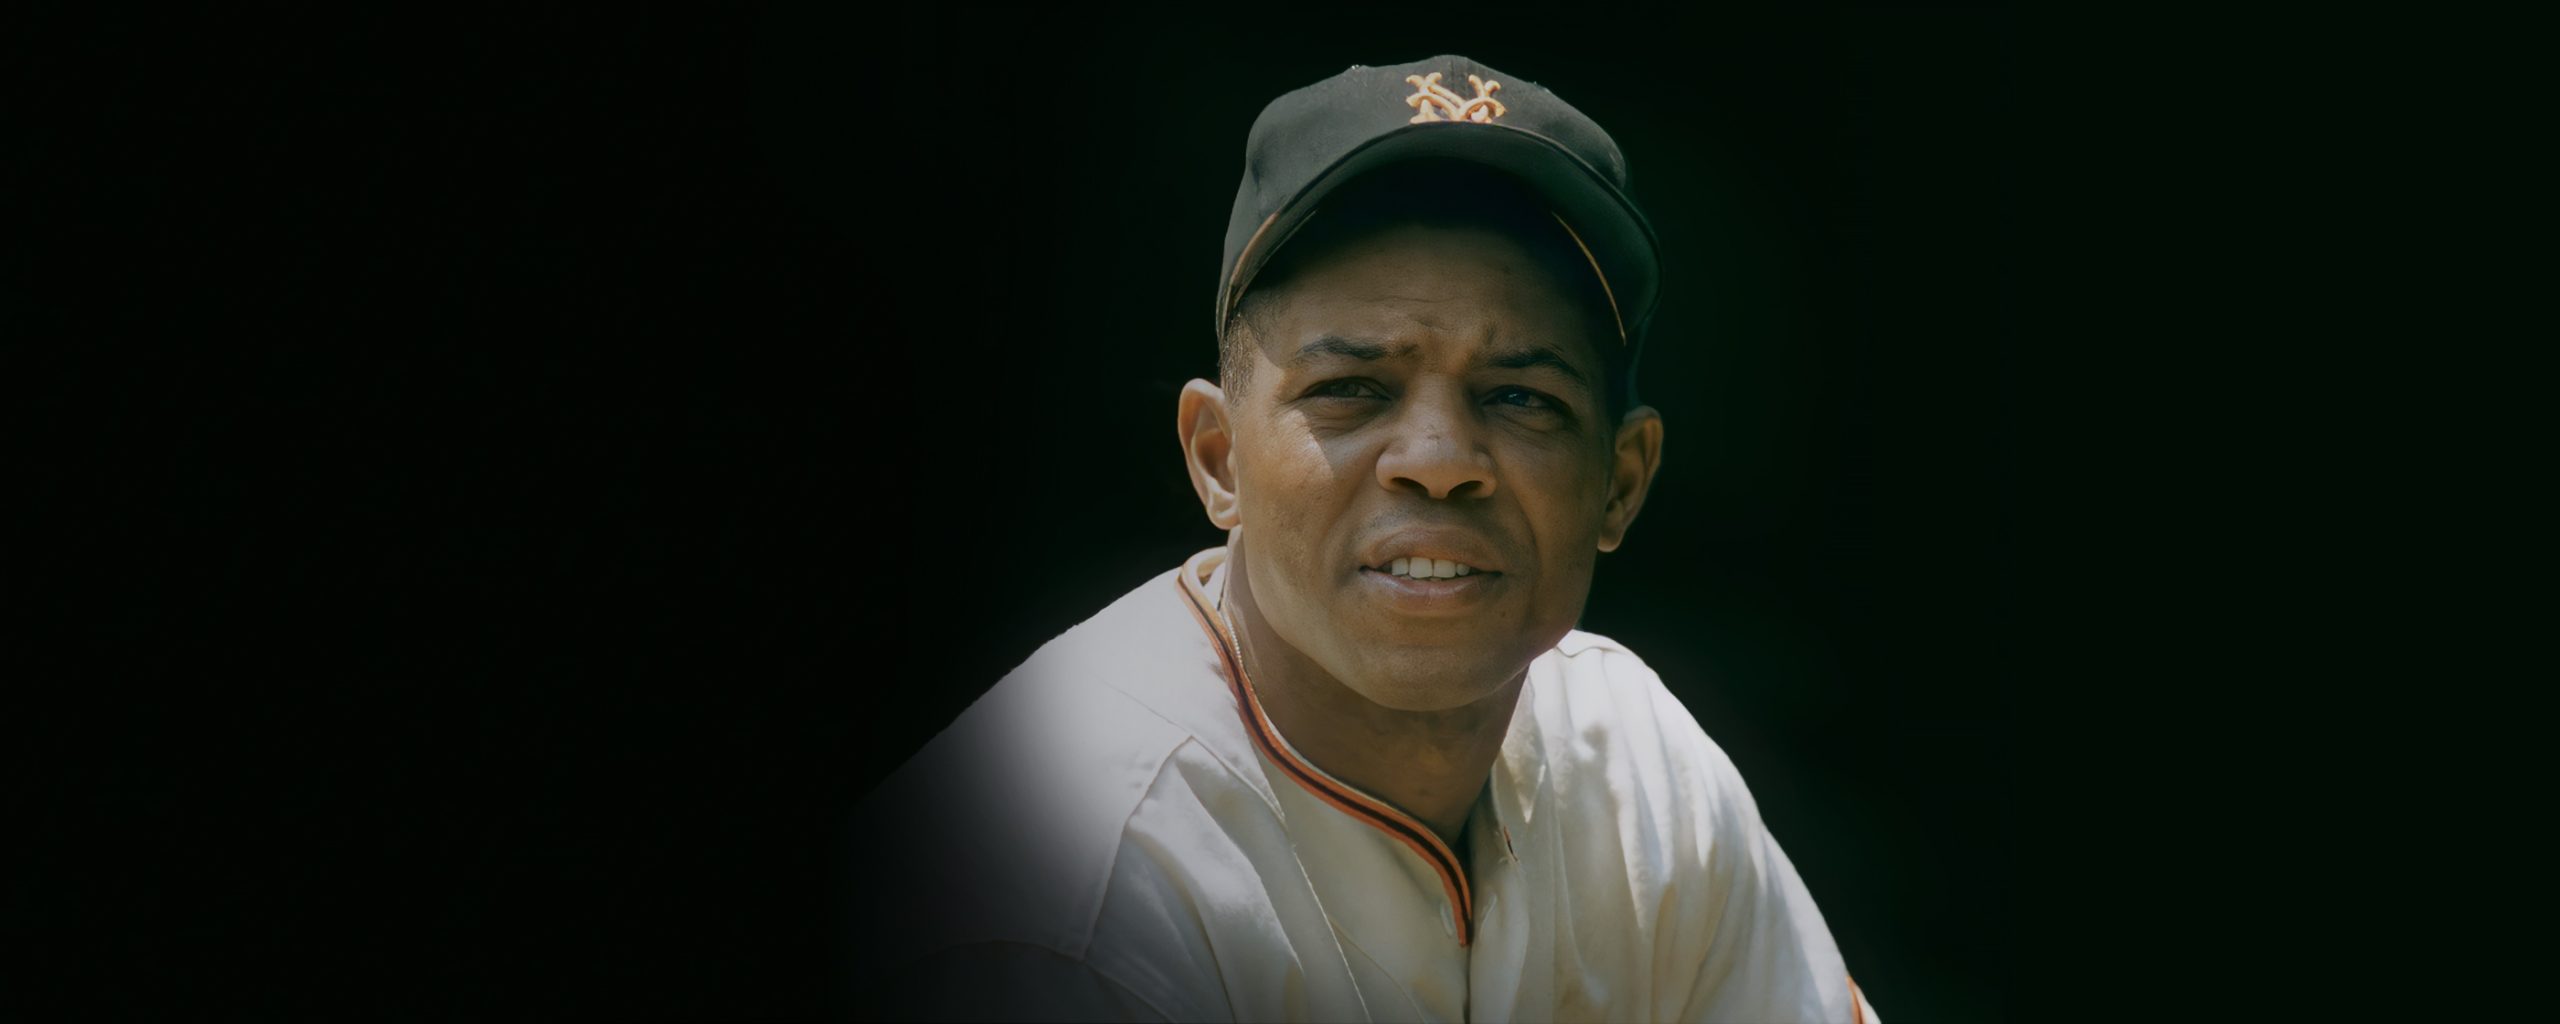 Willie Mays Signed Giants Mitchell & Ness Career Highlight Stat